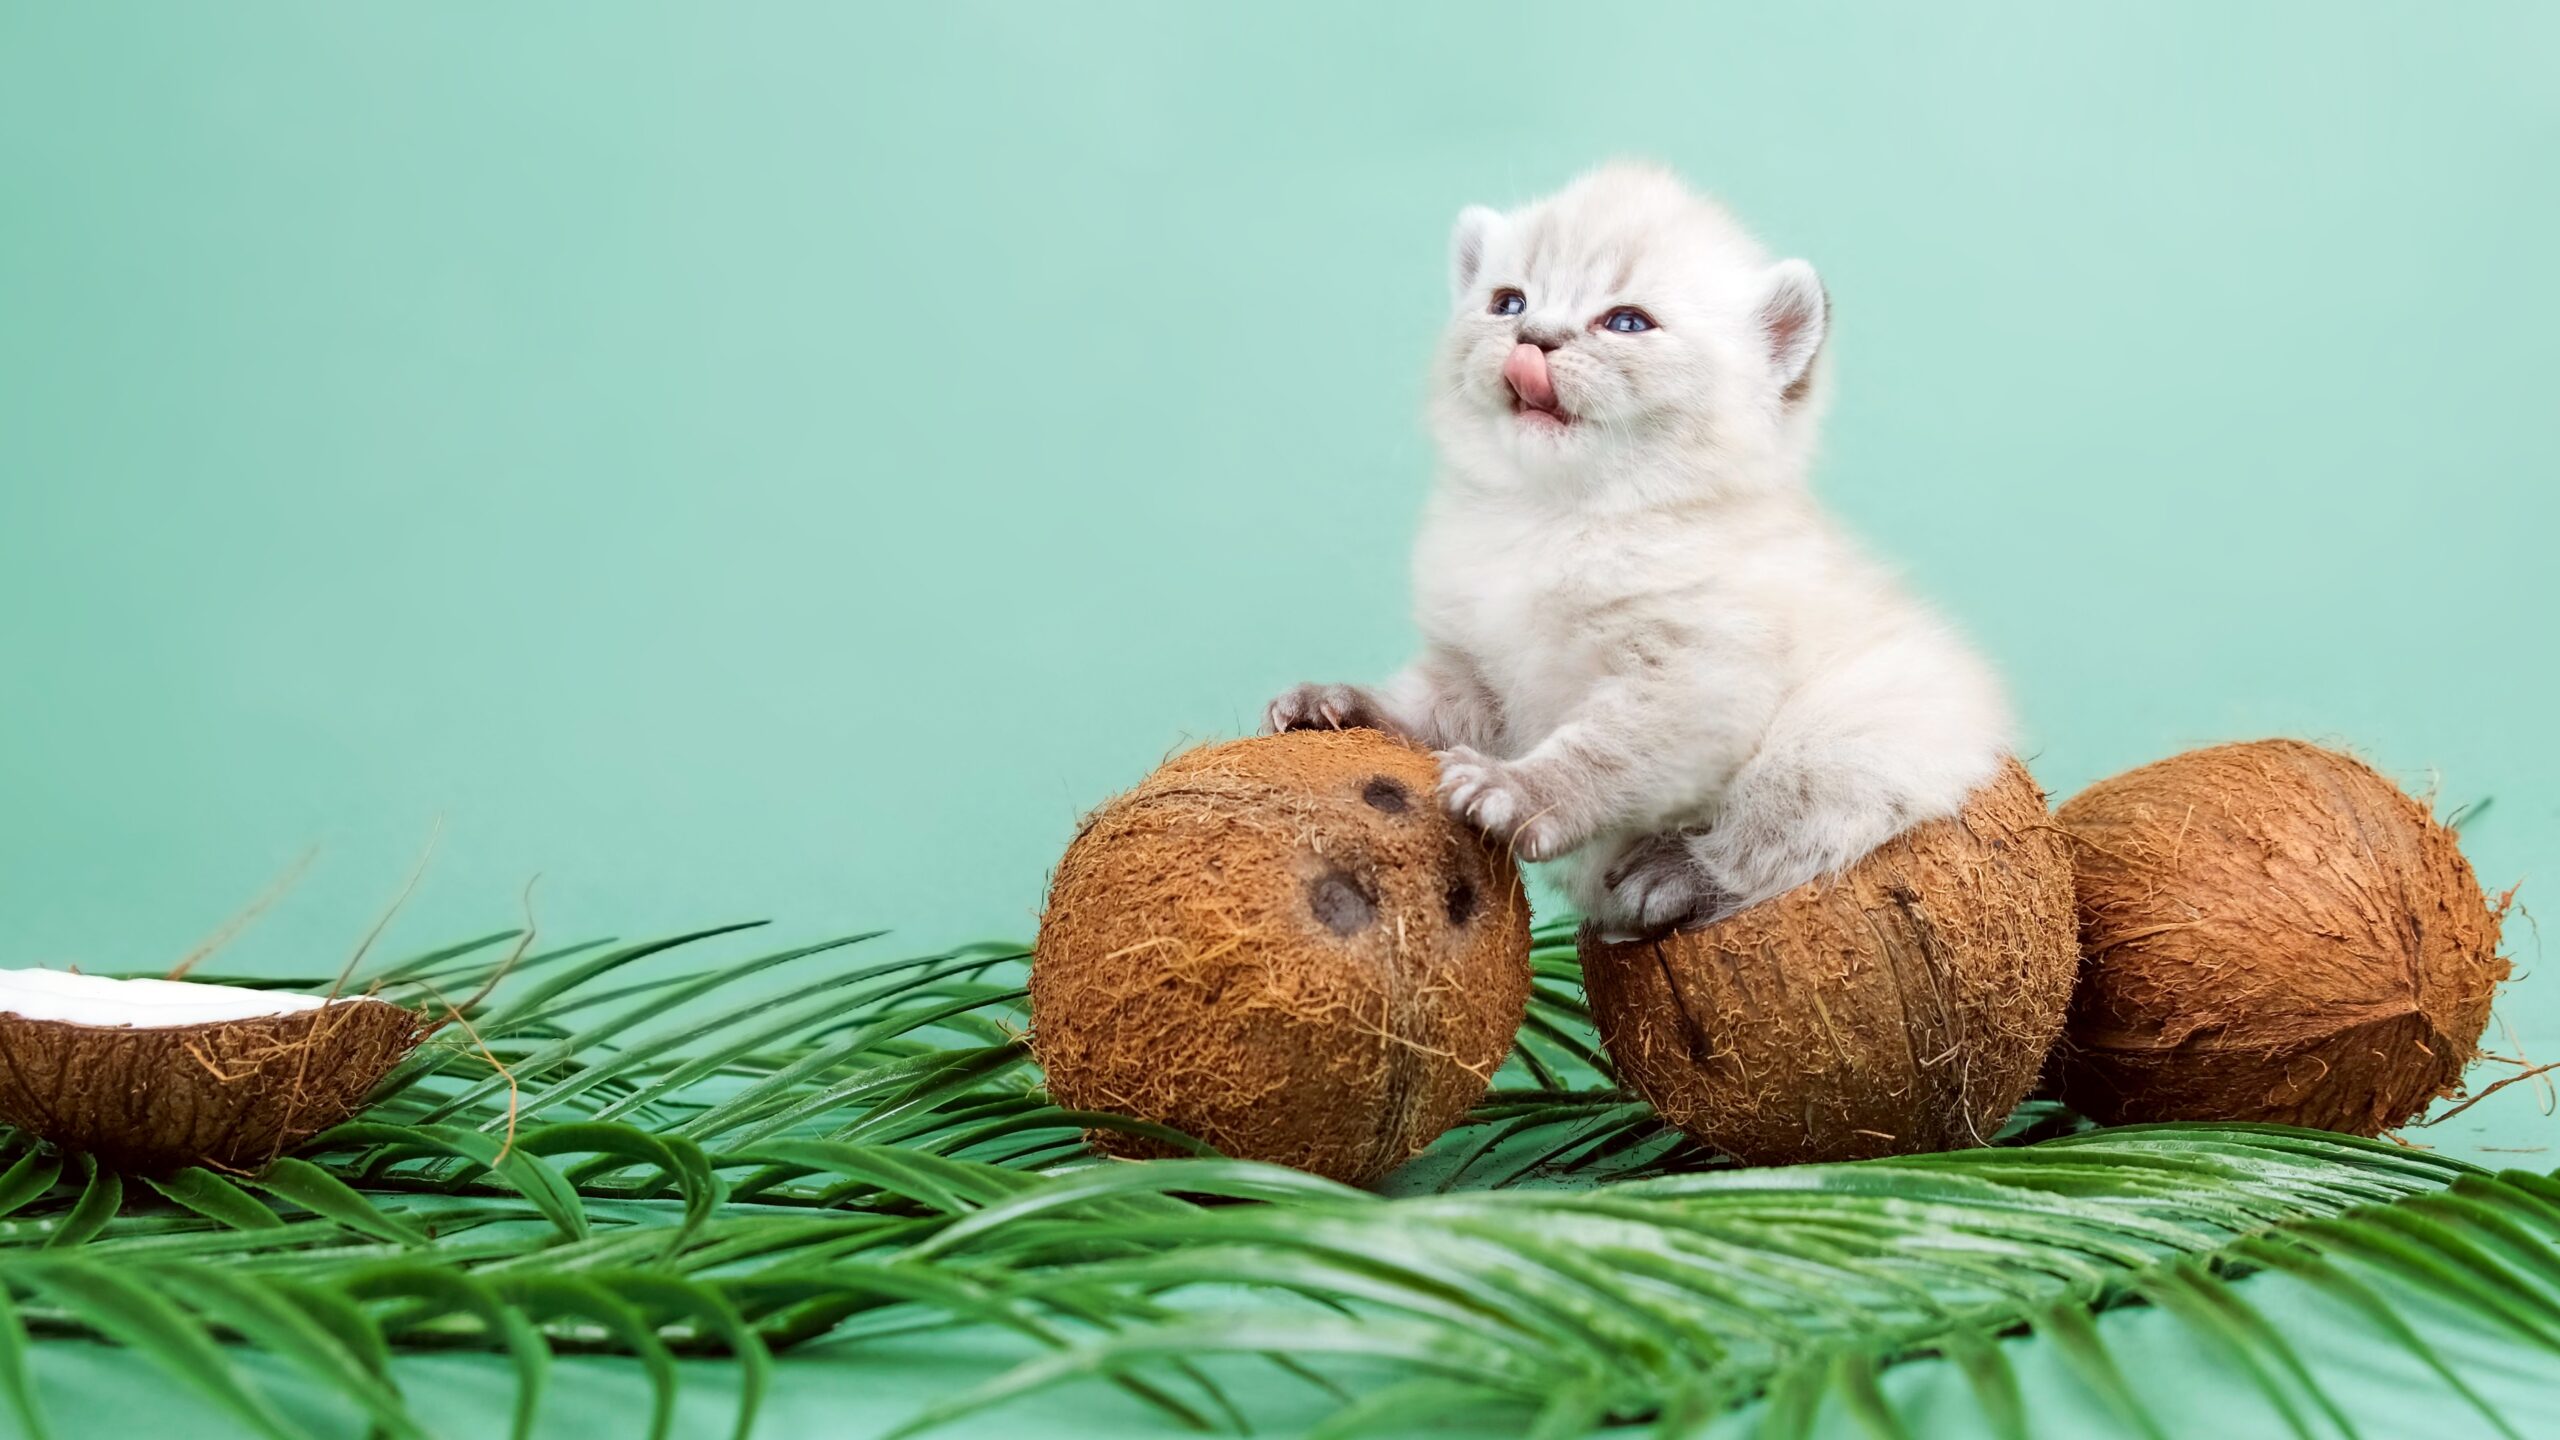 The,Kitten,Sits,In,A,Coconut,And,Licks,Its,Lips.